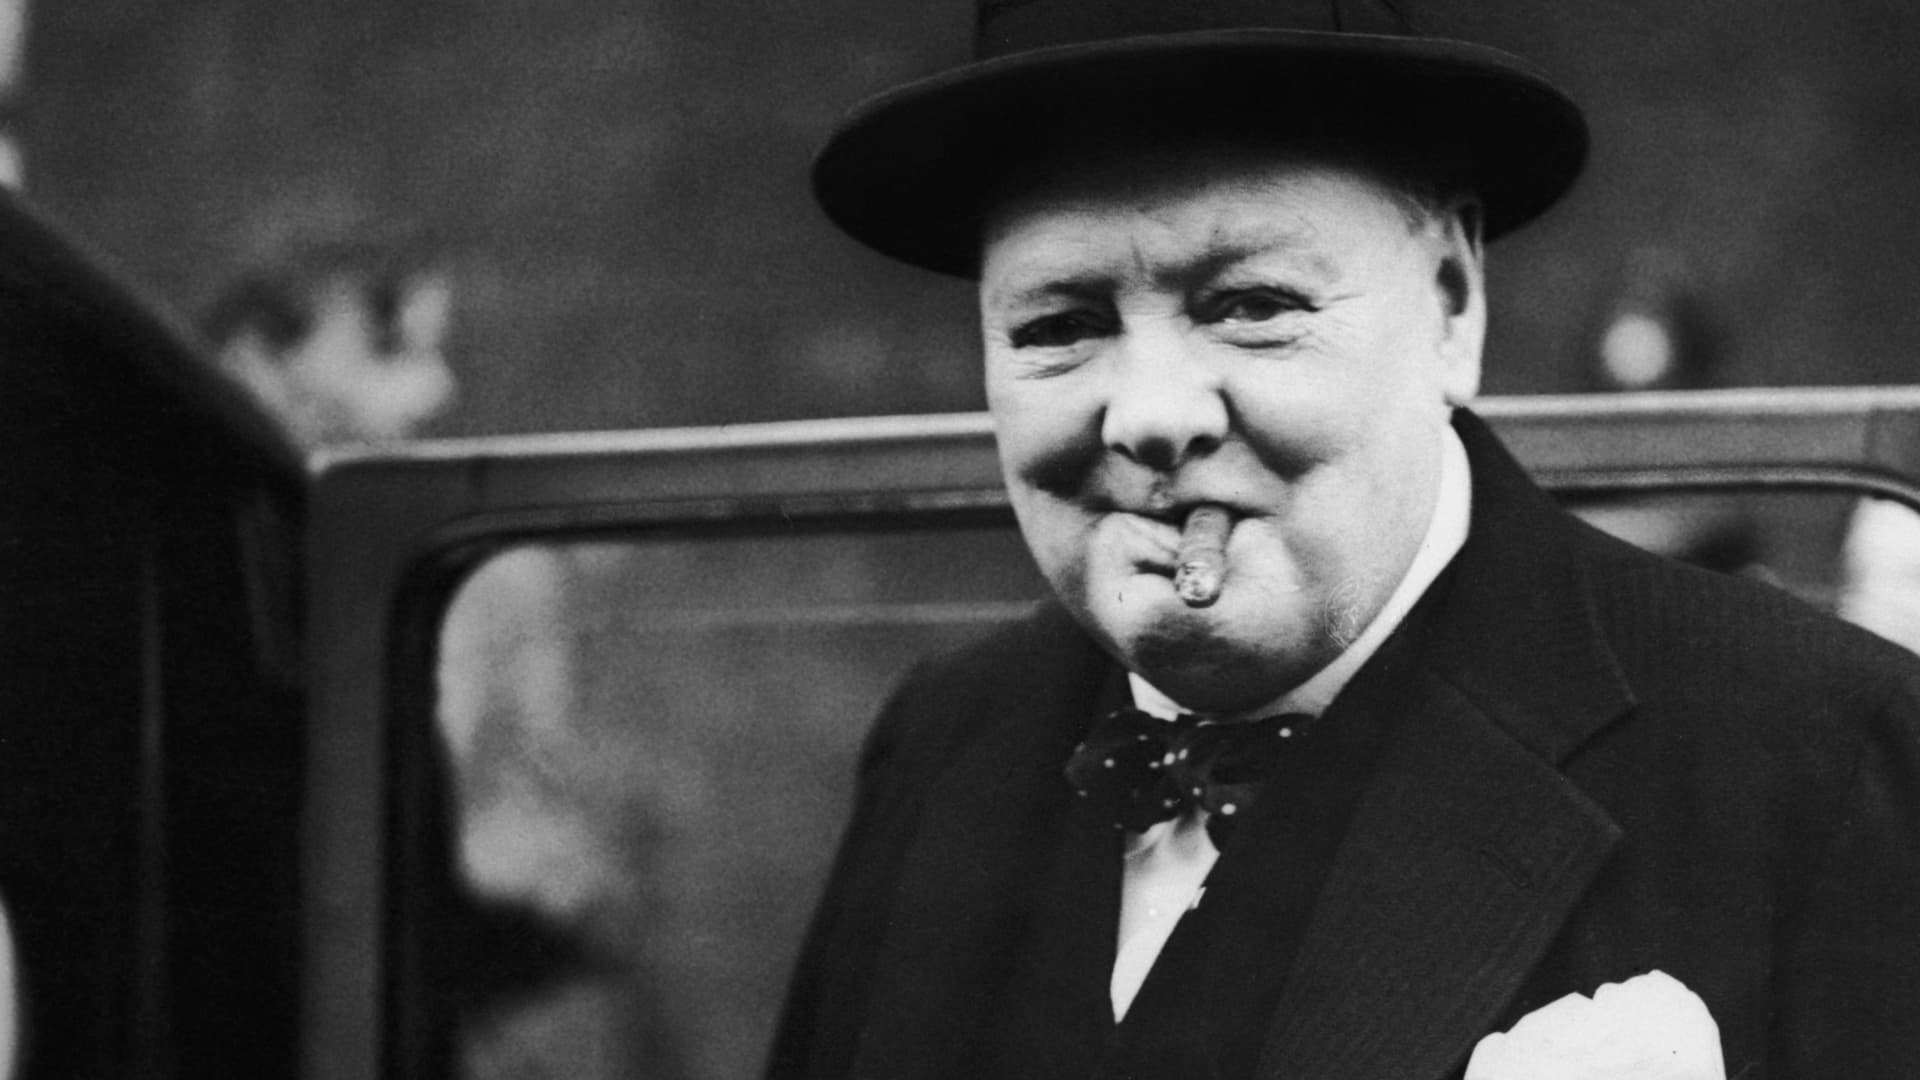 At what age did Churchill became Prime Minister? What did Churchill